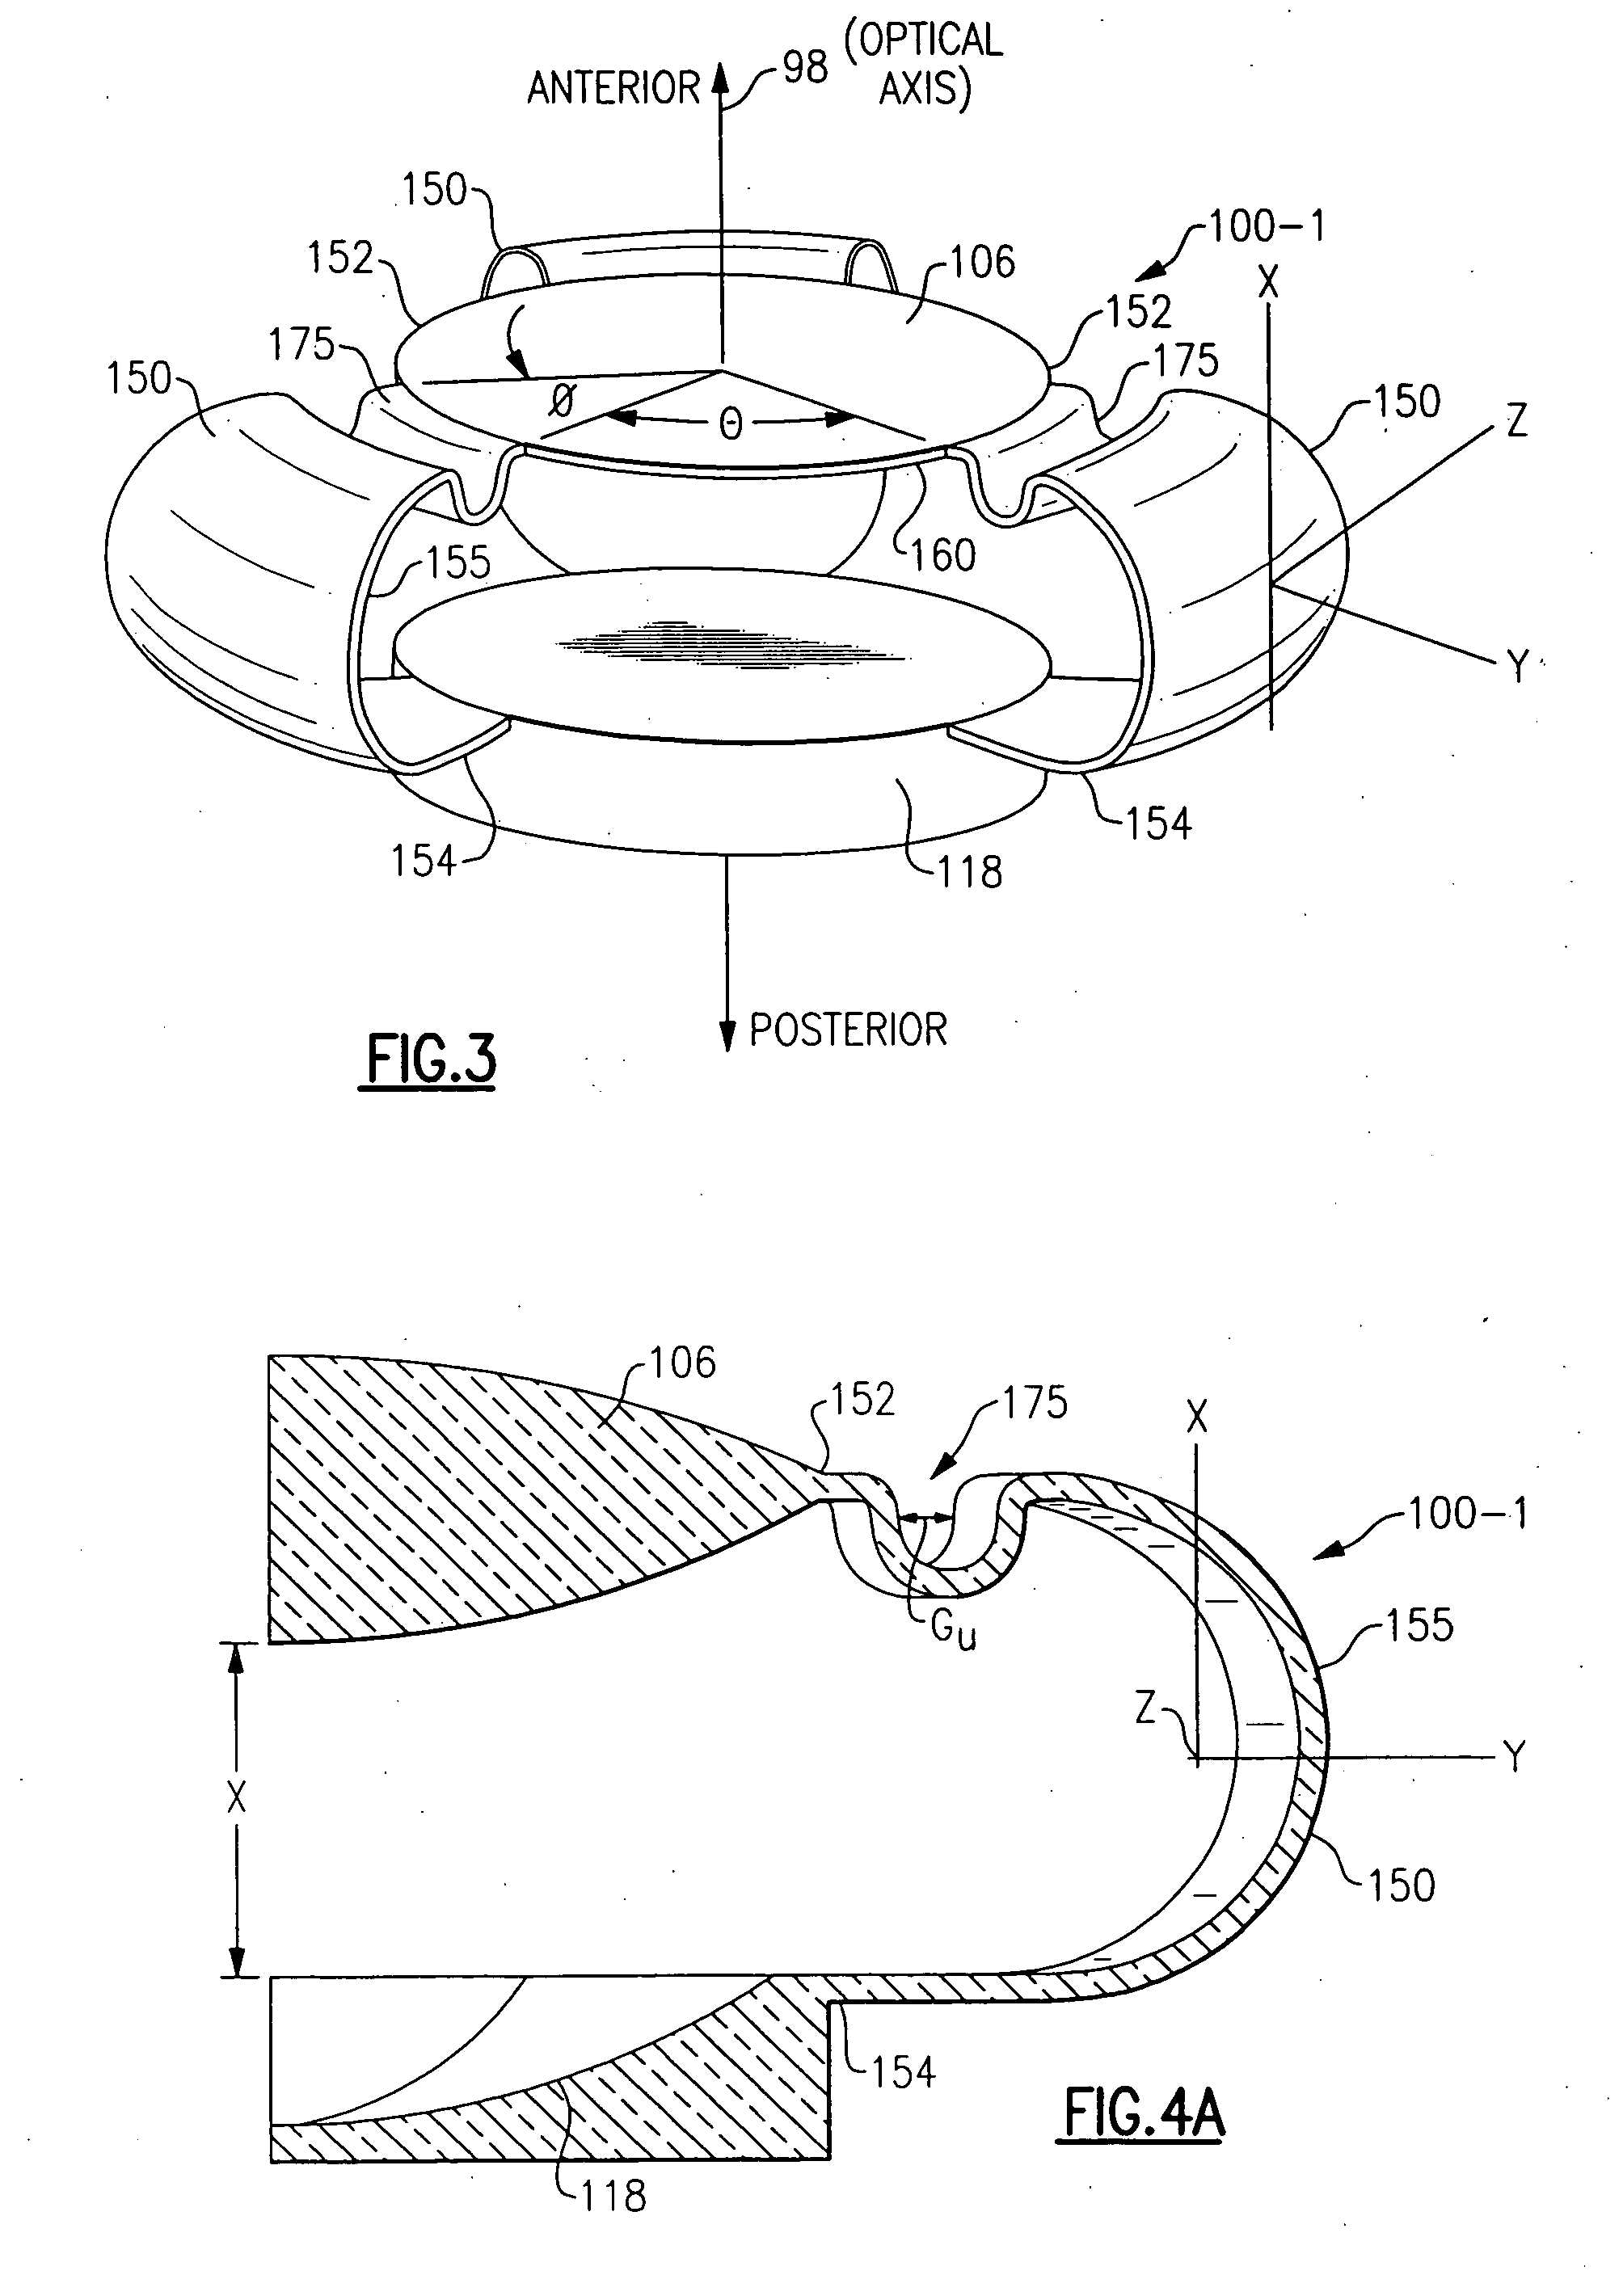 Multi-component accommodative intraocular lens with compressible haptic